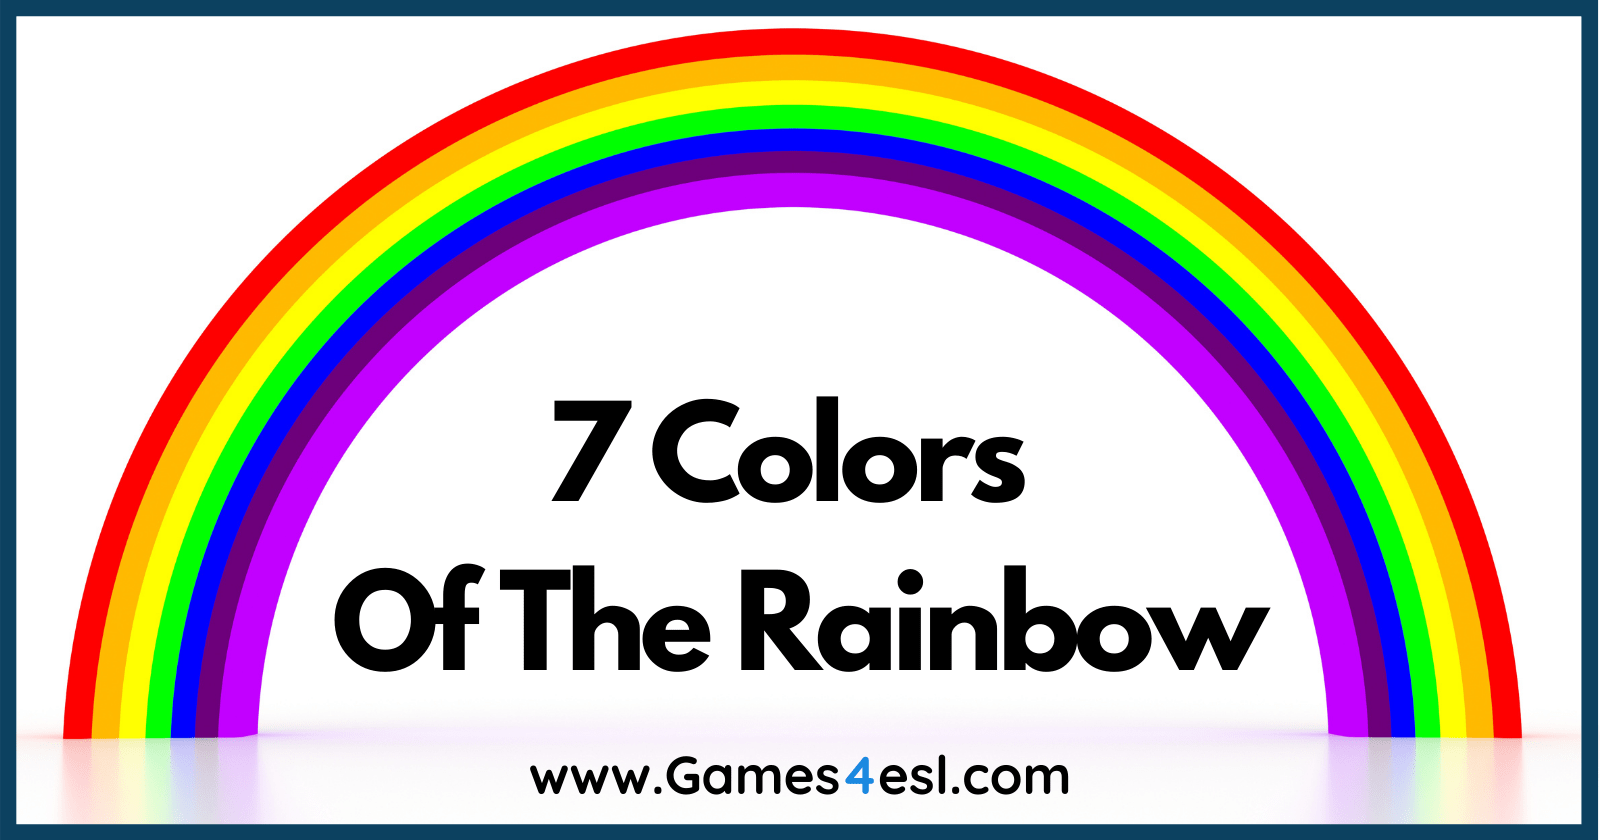 The Seven Colors Of The Rainbow